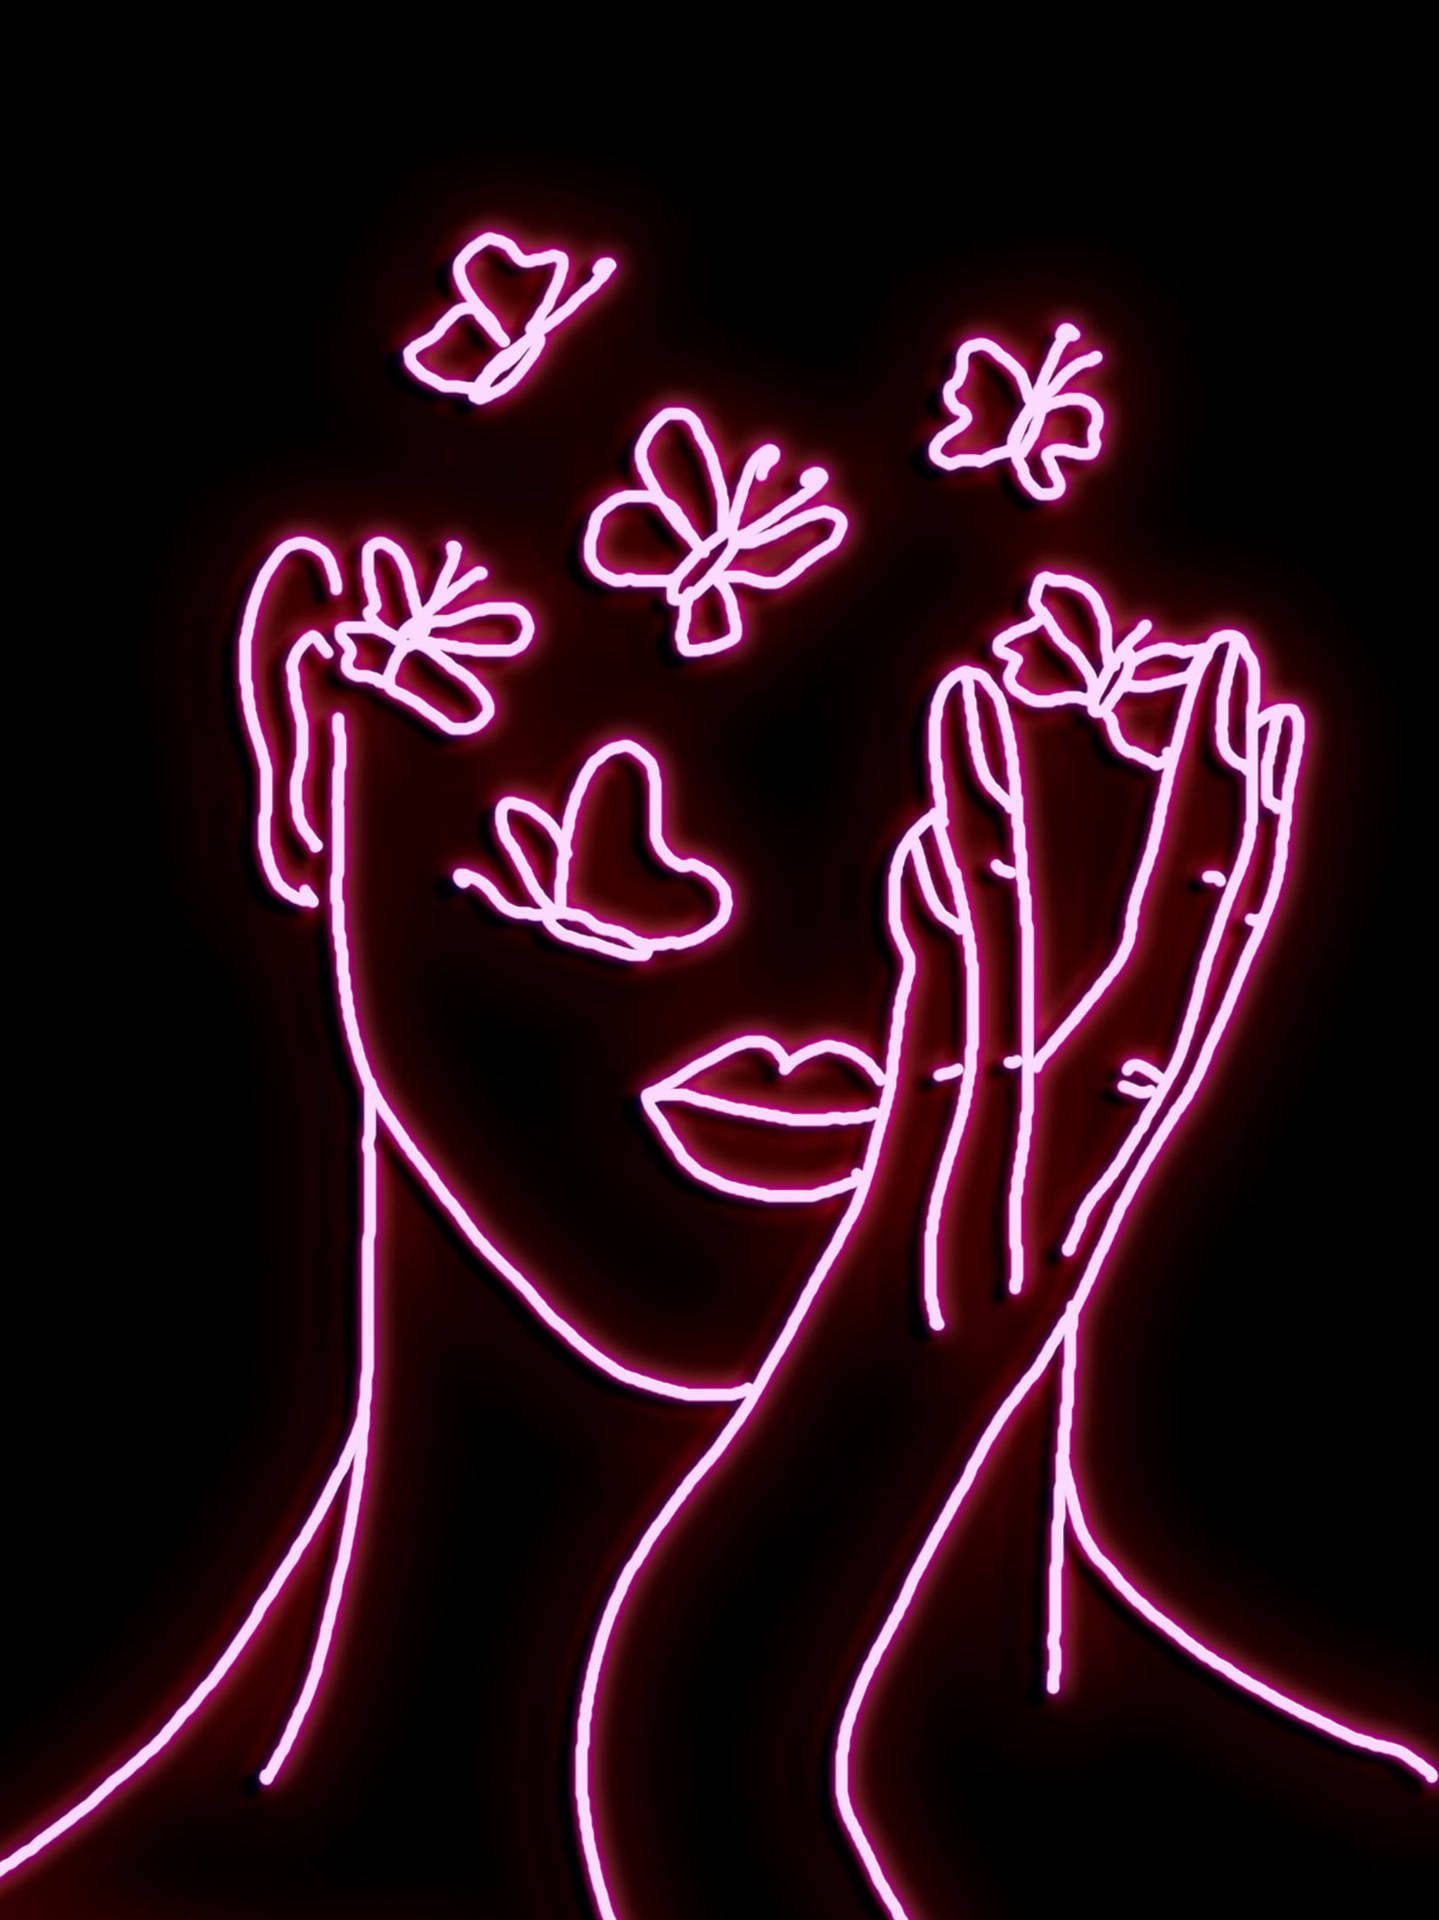 A neon pink outline of a woman's face with butterflies around it - Neon pink, hot pink